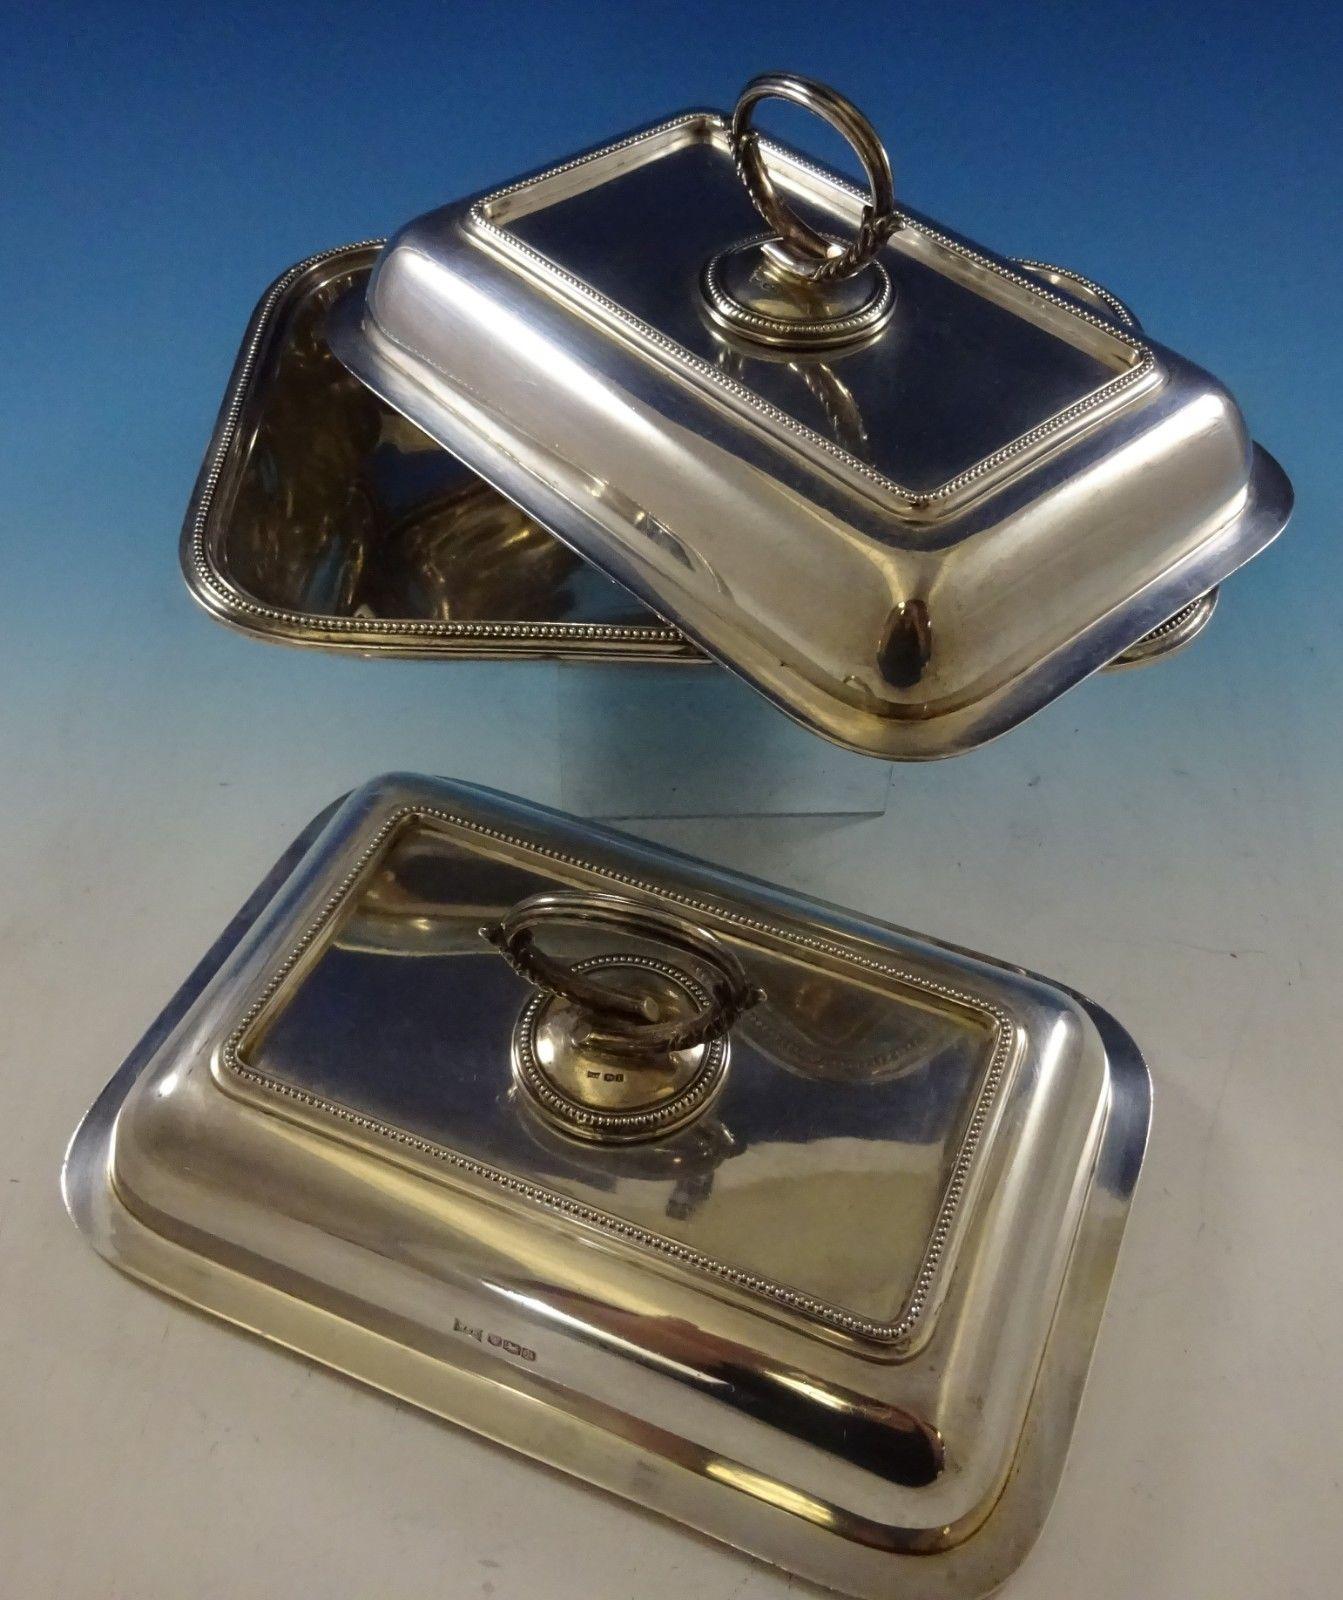 Wonderful Bead by Walker & Hall sterling silver covered vegetable dish with extra cover 3-piece set. The covers have removable handles therefore, the pieces together could be used as three dishes if desired. The covered vegetable dish measures 11 x